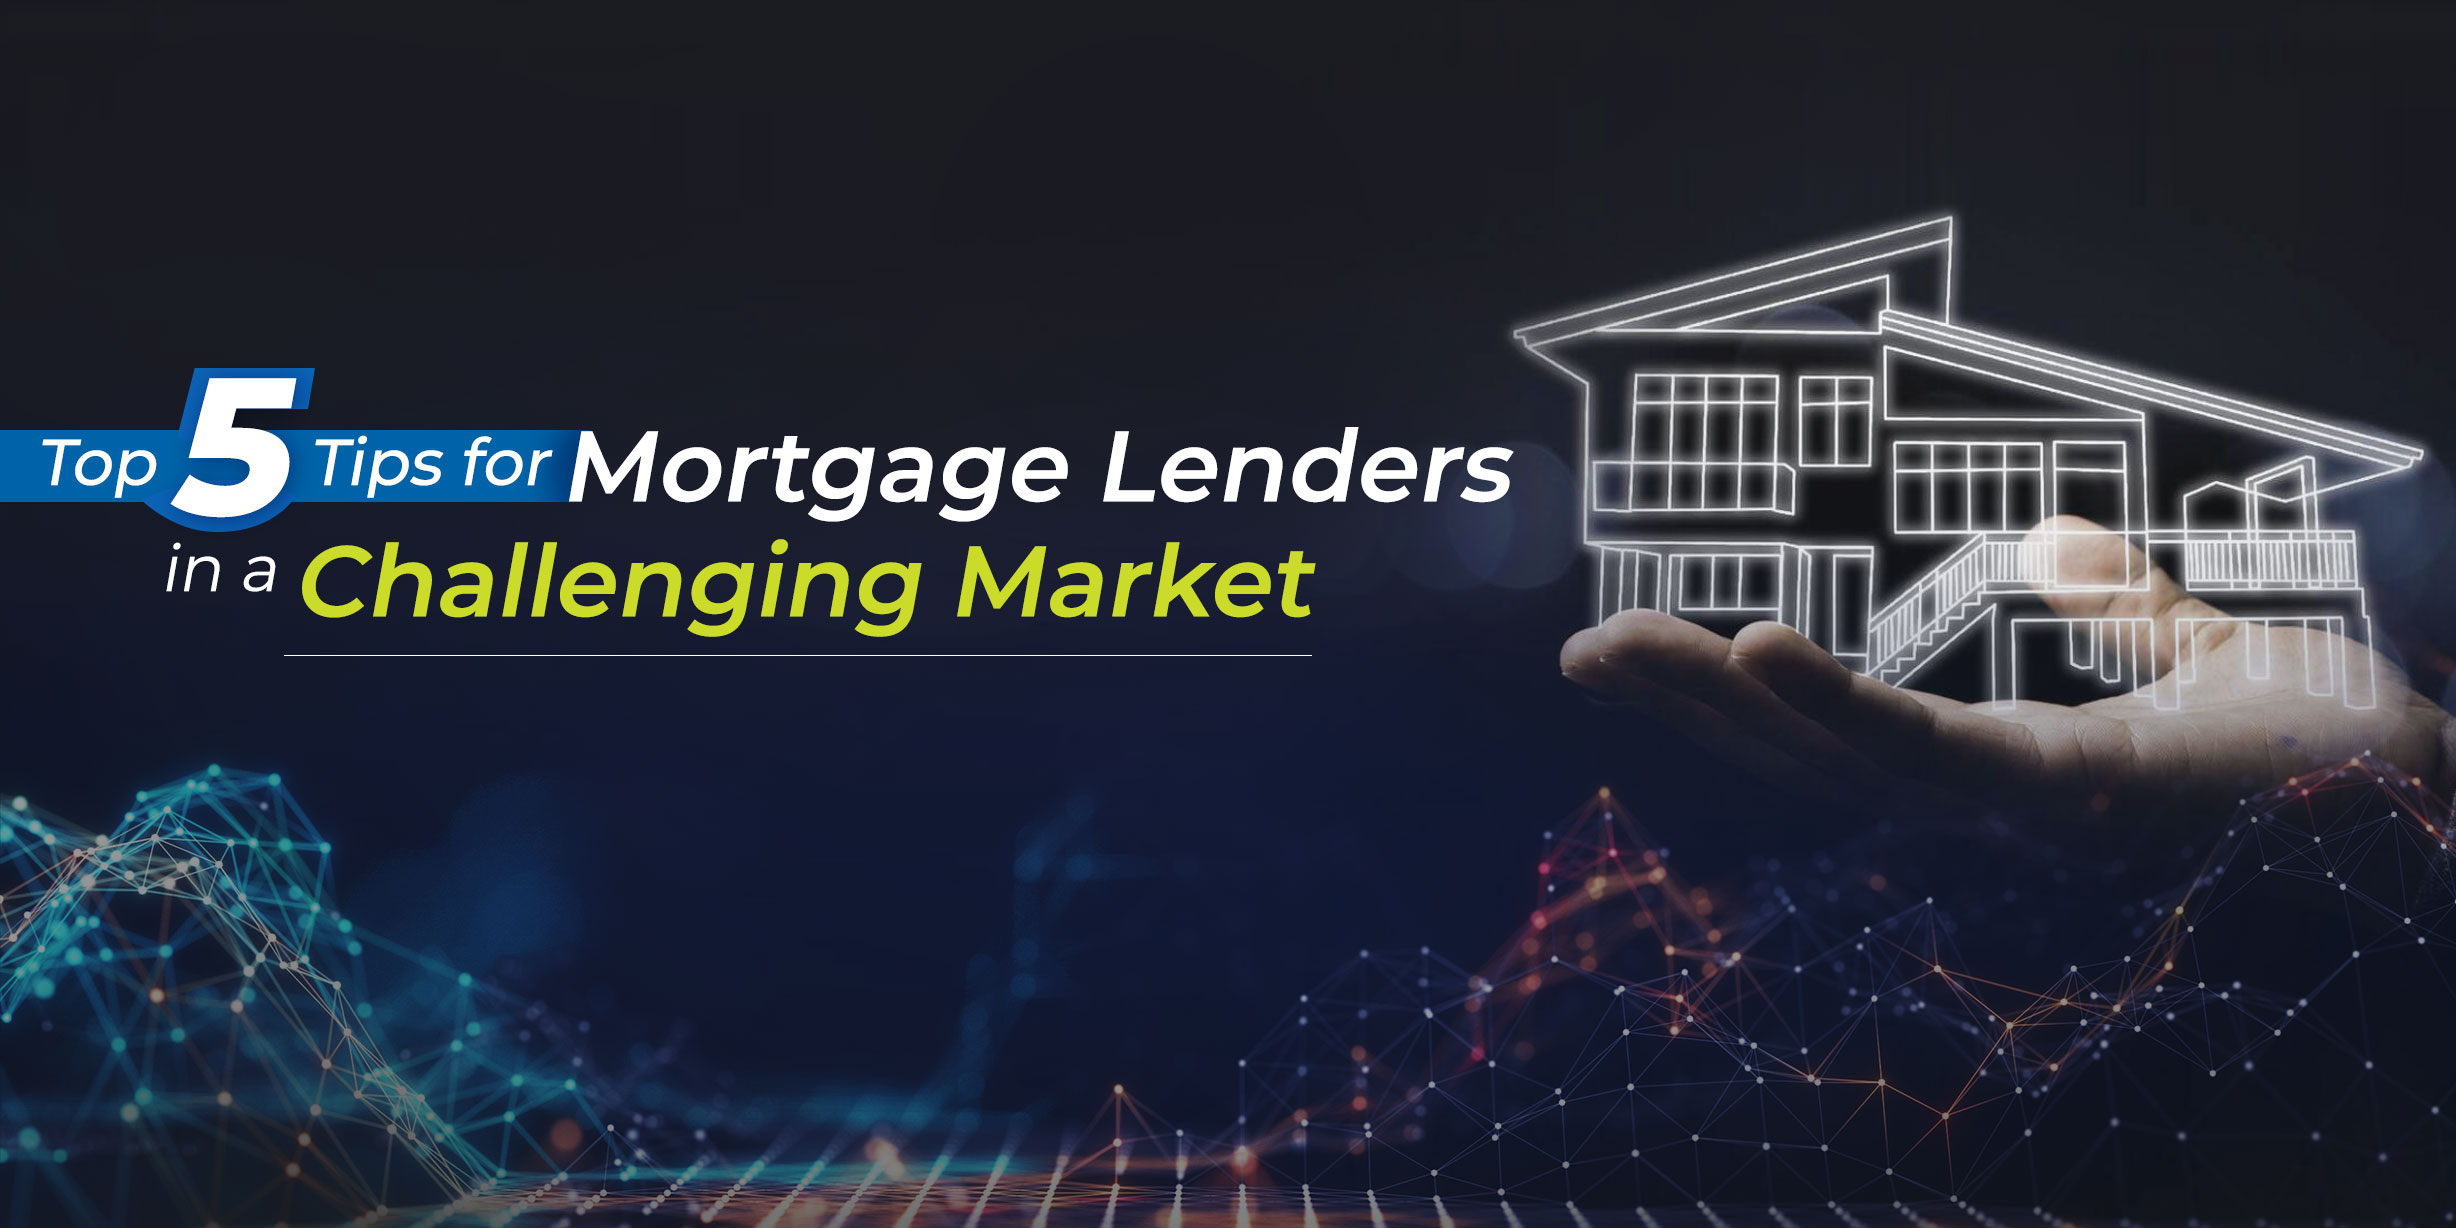 Navigating a challenging market? Discover five expert tips for mortgage lenders to thrive and succeed amidst uncertainty.